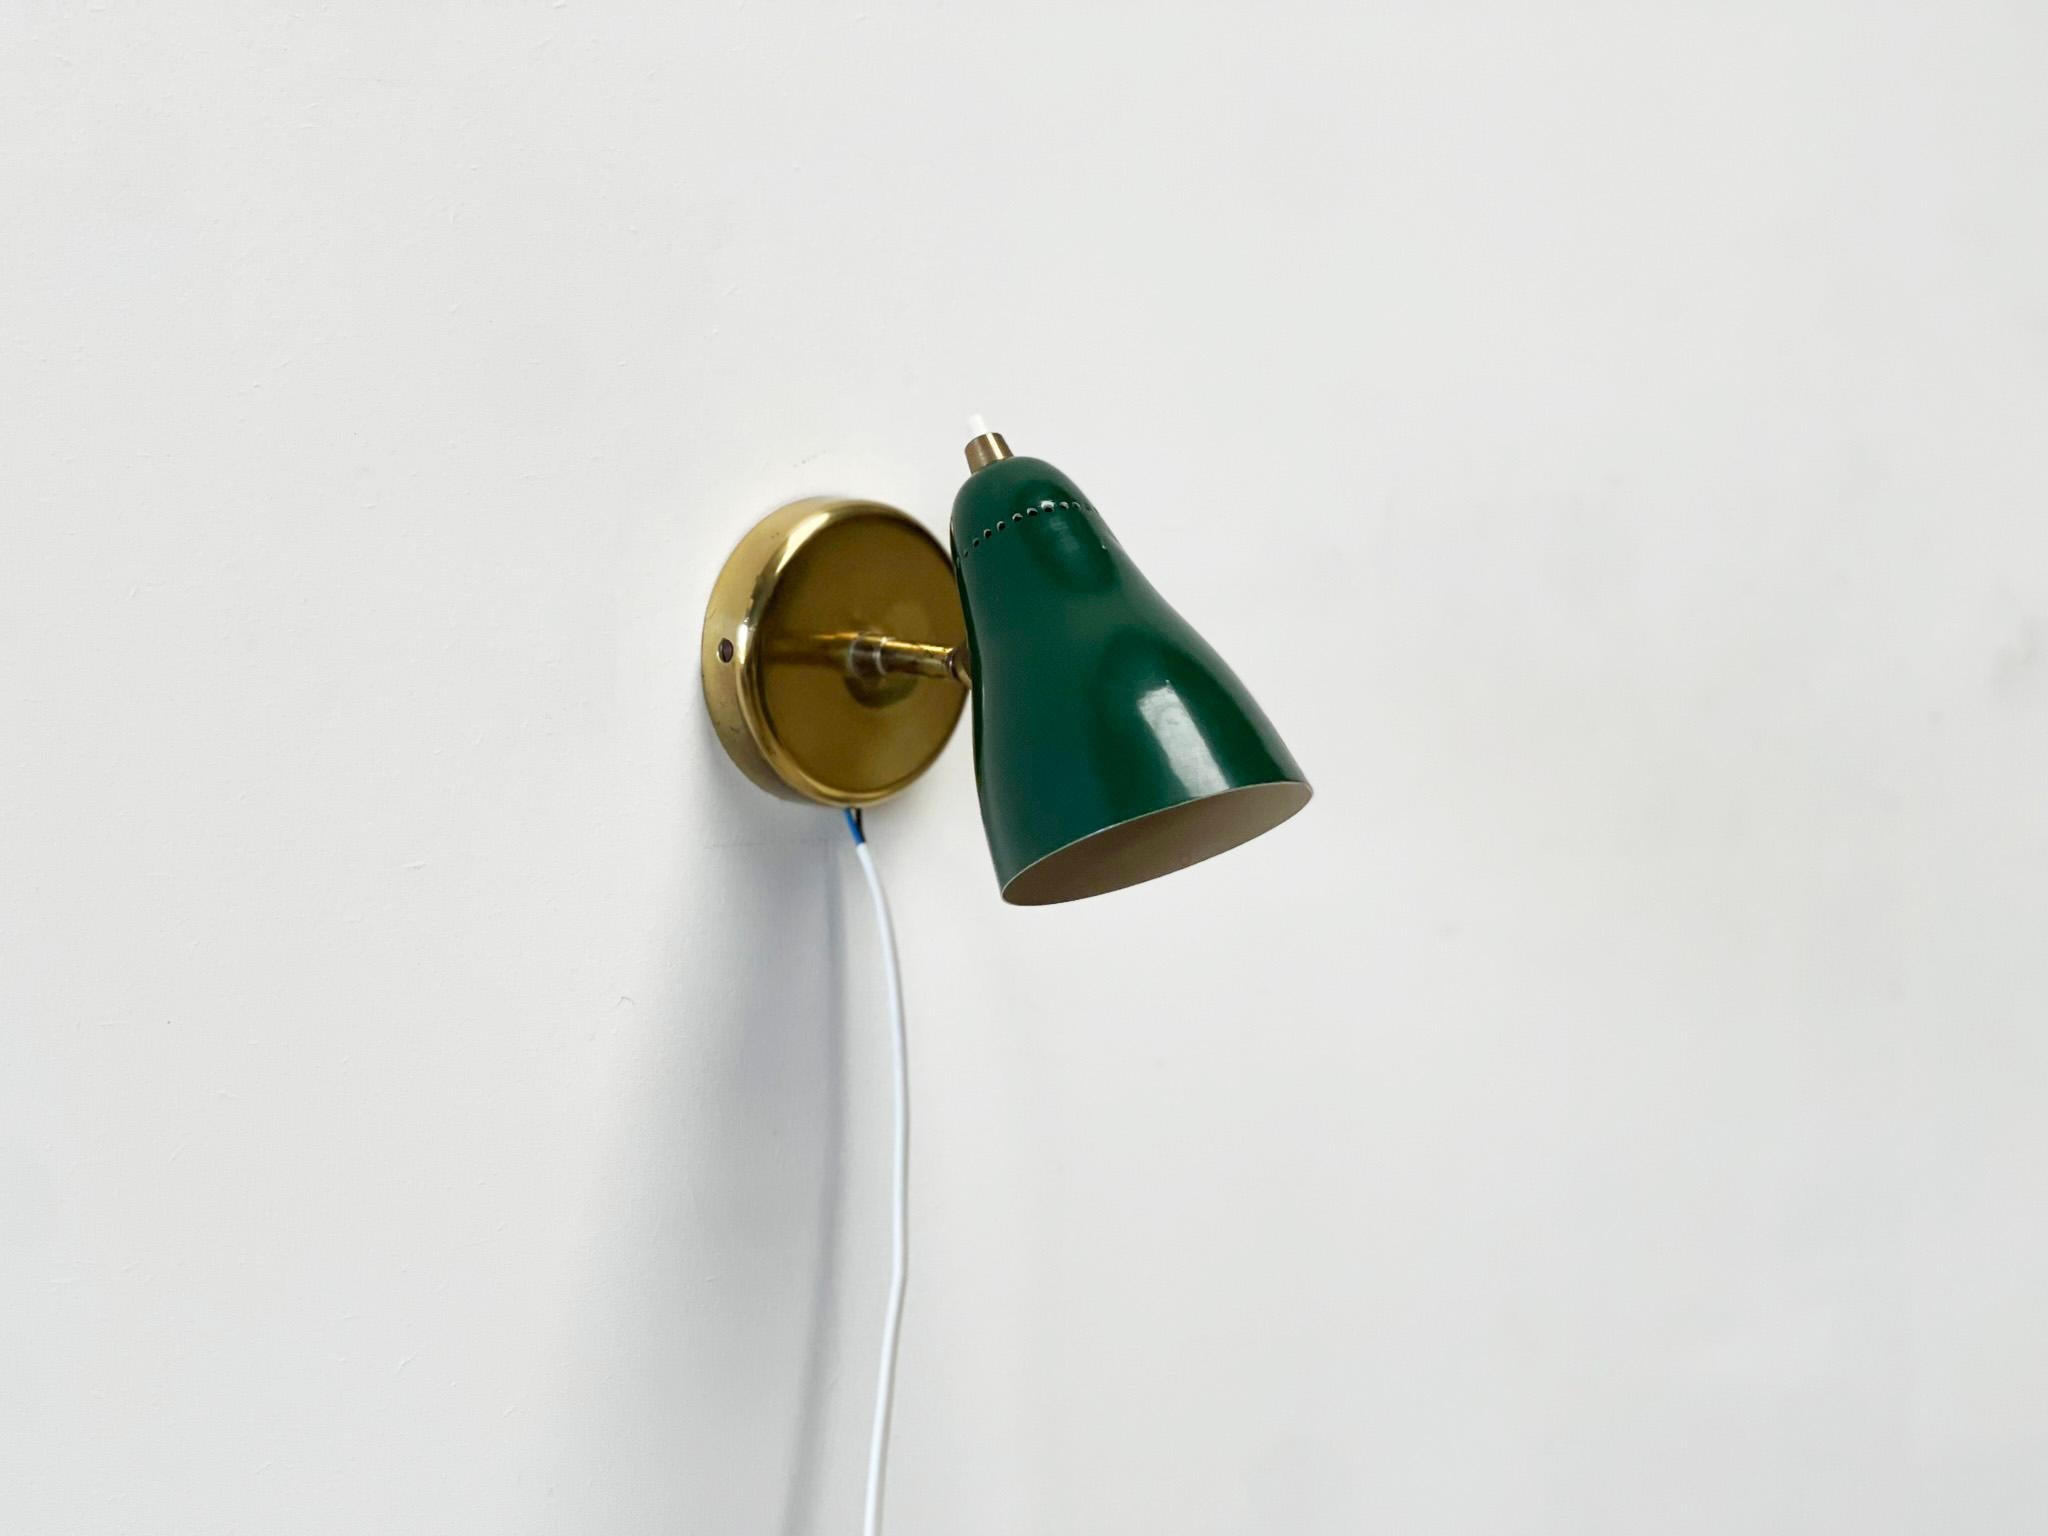 Green Perforated Wall Lamp by Jacques Biny
Nice wall lamp designed by Jacques Biny. These are typical elegant lamps from the 50's. This one has a very nice enamel shade with brass wall bracket. 

This is a very good example of the typical French